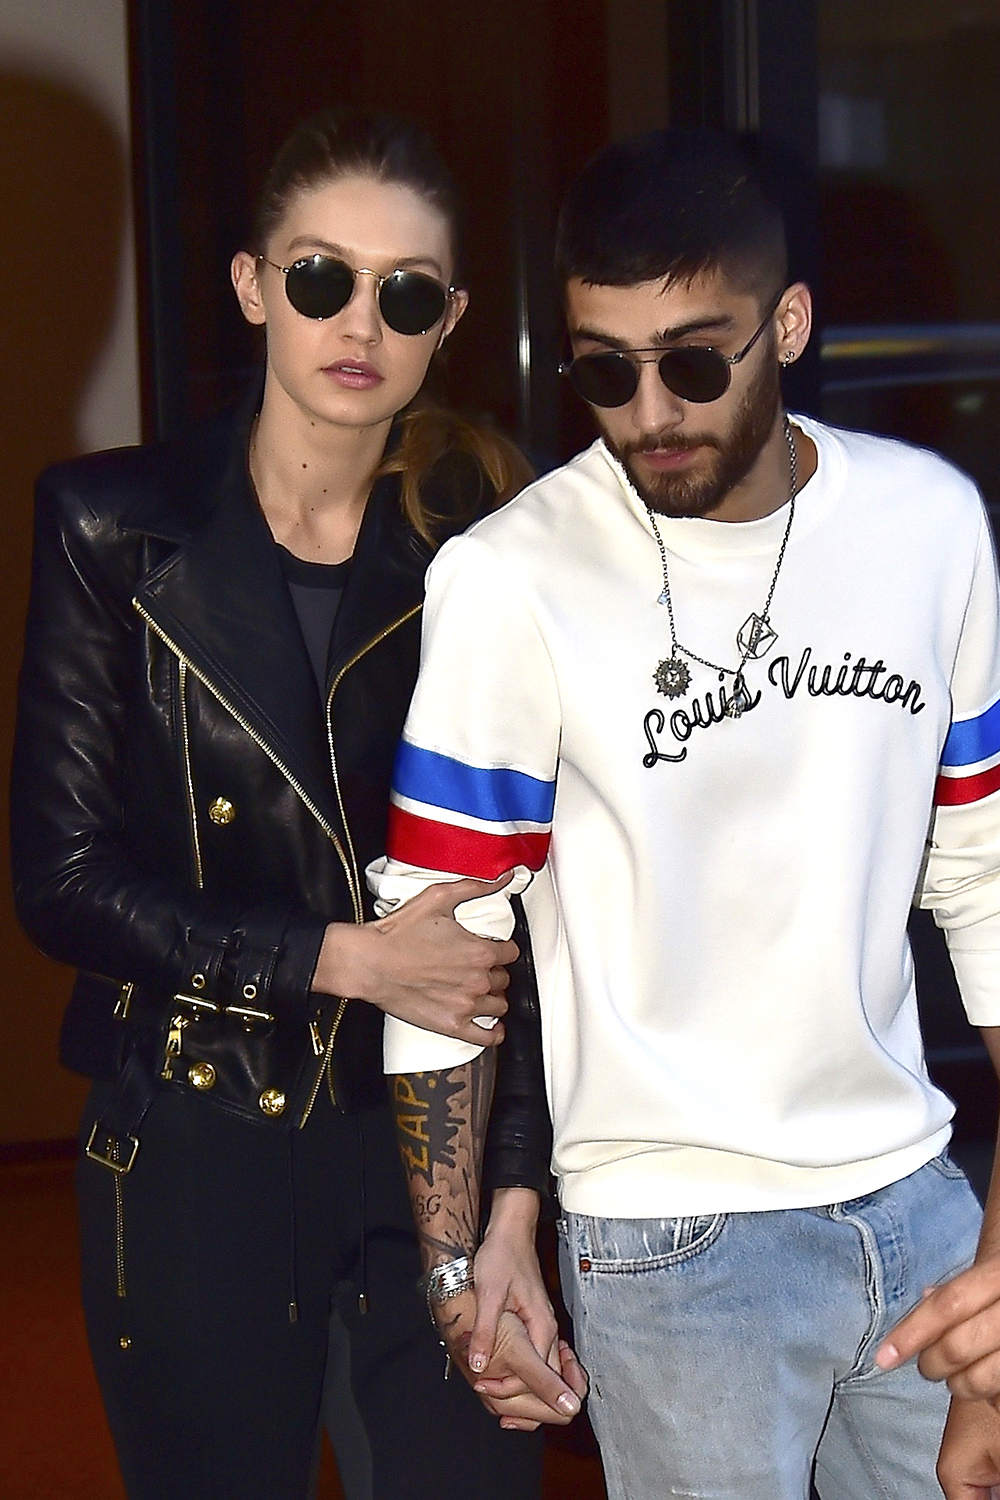 Gigi Hadid and Zayn Malik are the new power-couple of their generation and just celebrated their 10 month anniversary.